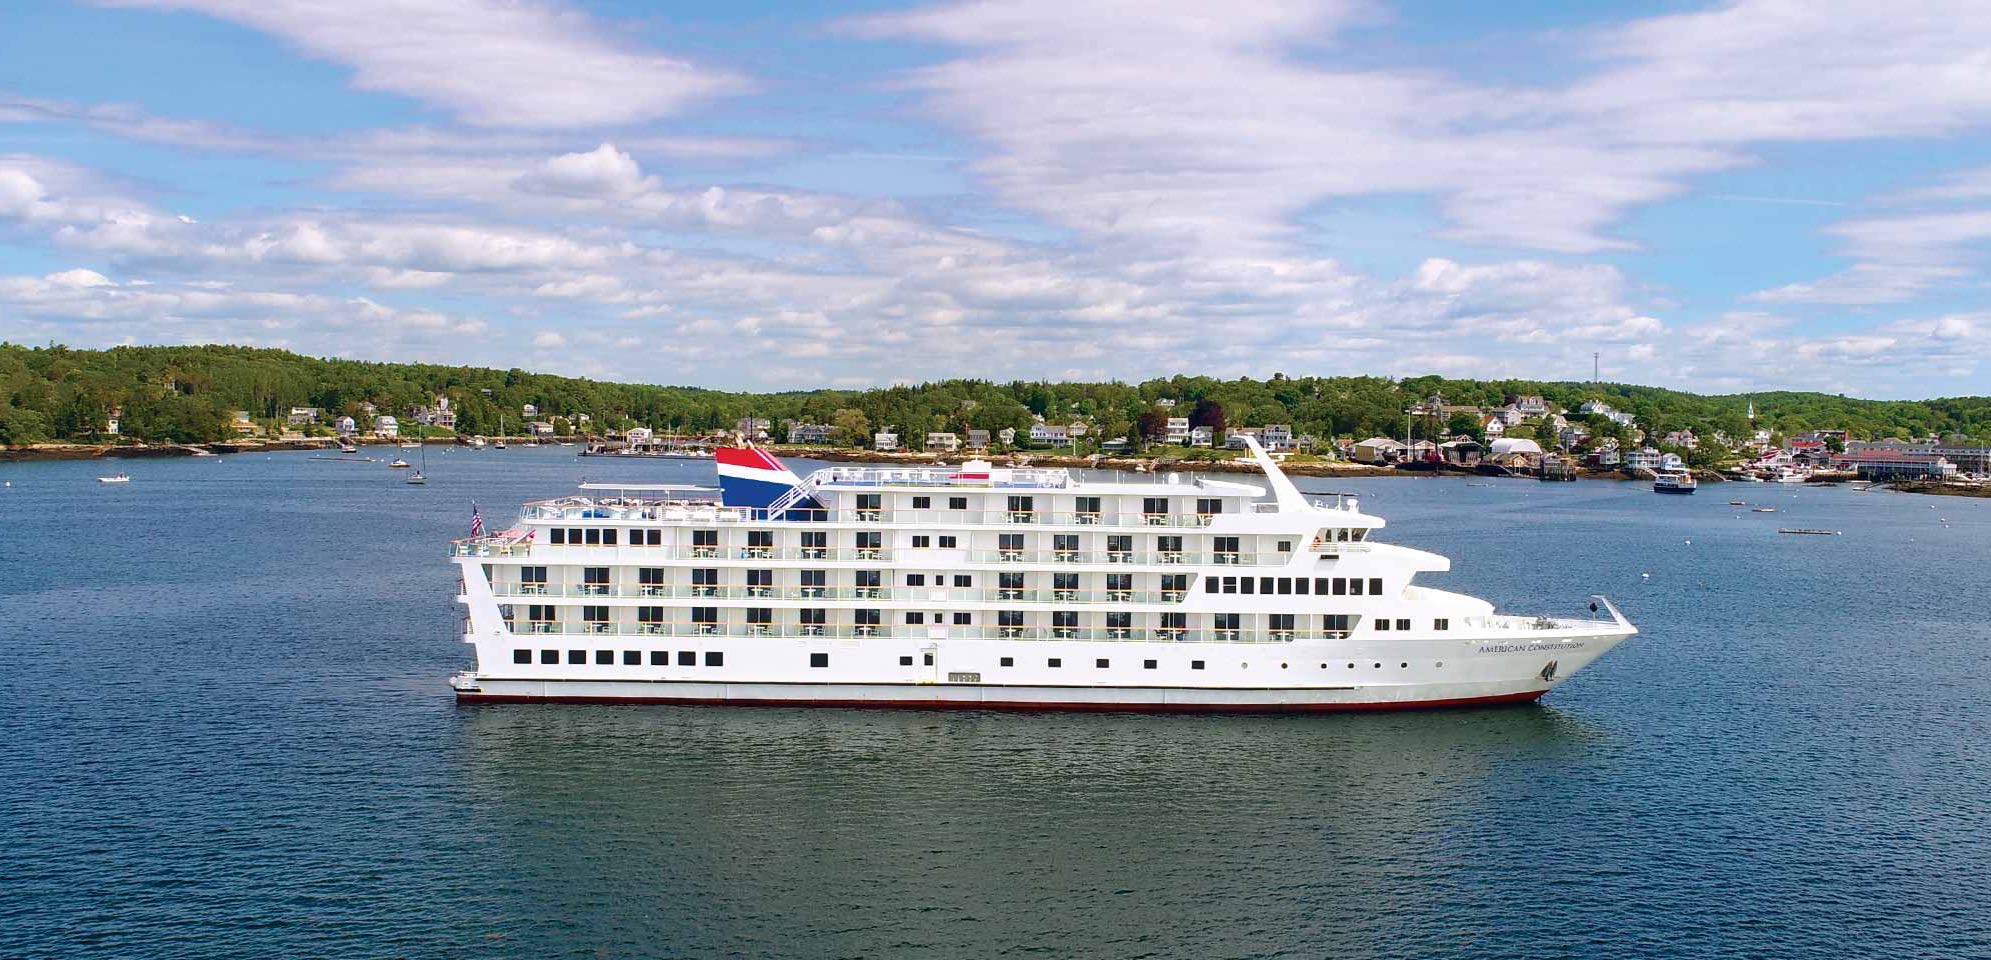 Bar Harbor rejects proposal for visits from small cruise ship for remainder of season | Mainebiz.biz